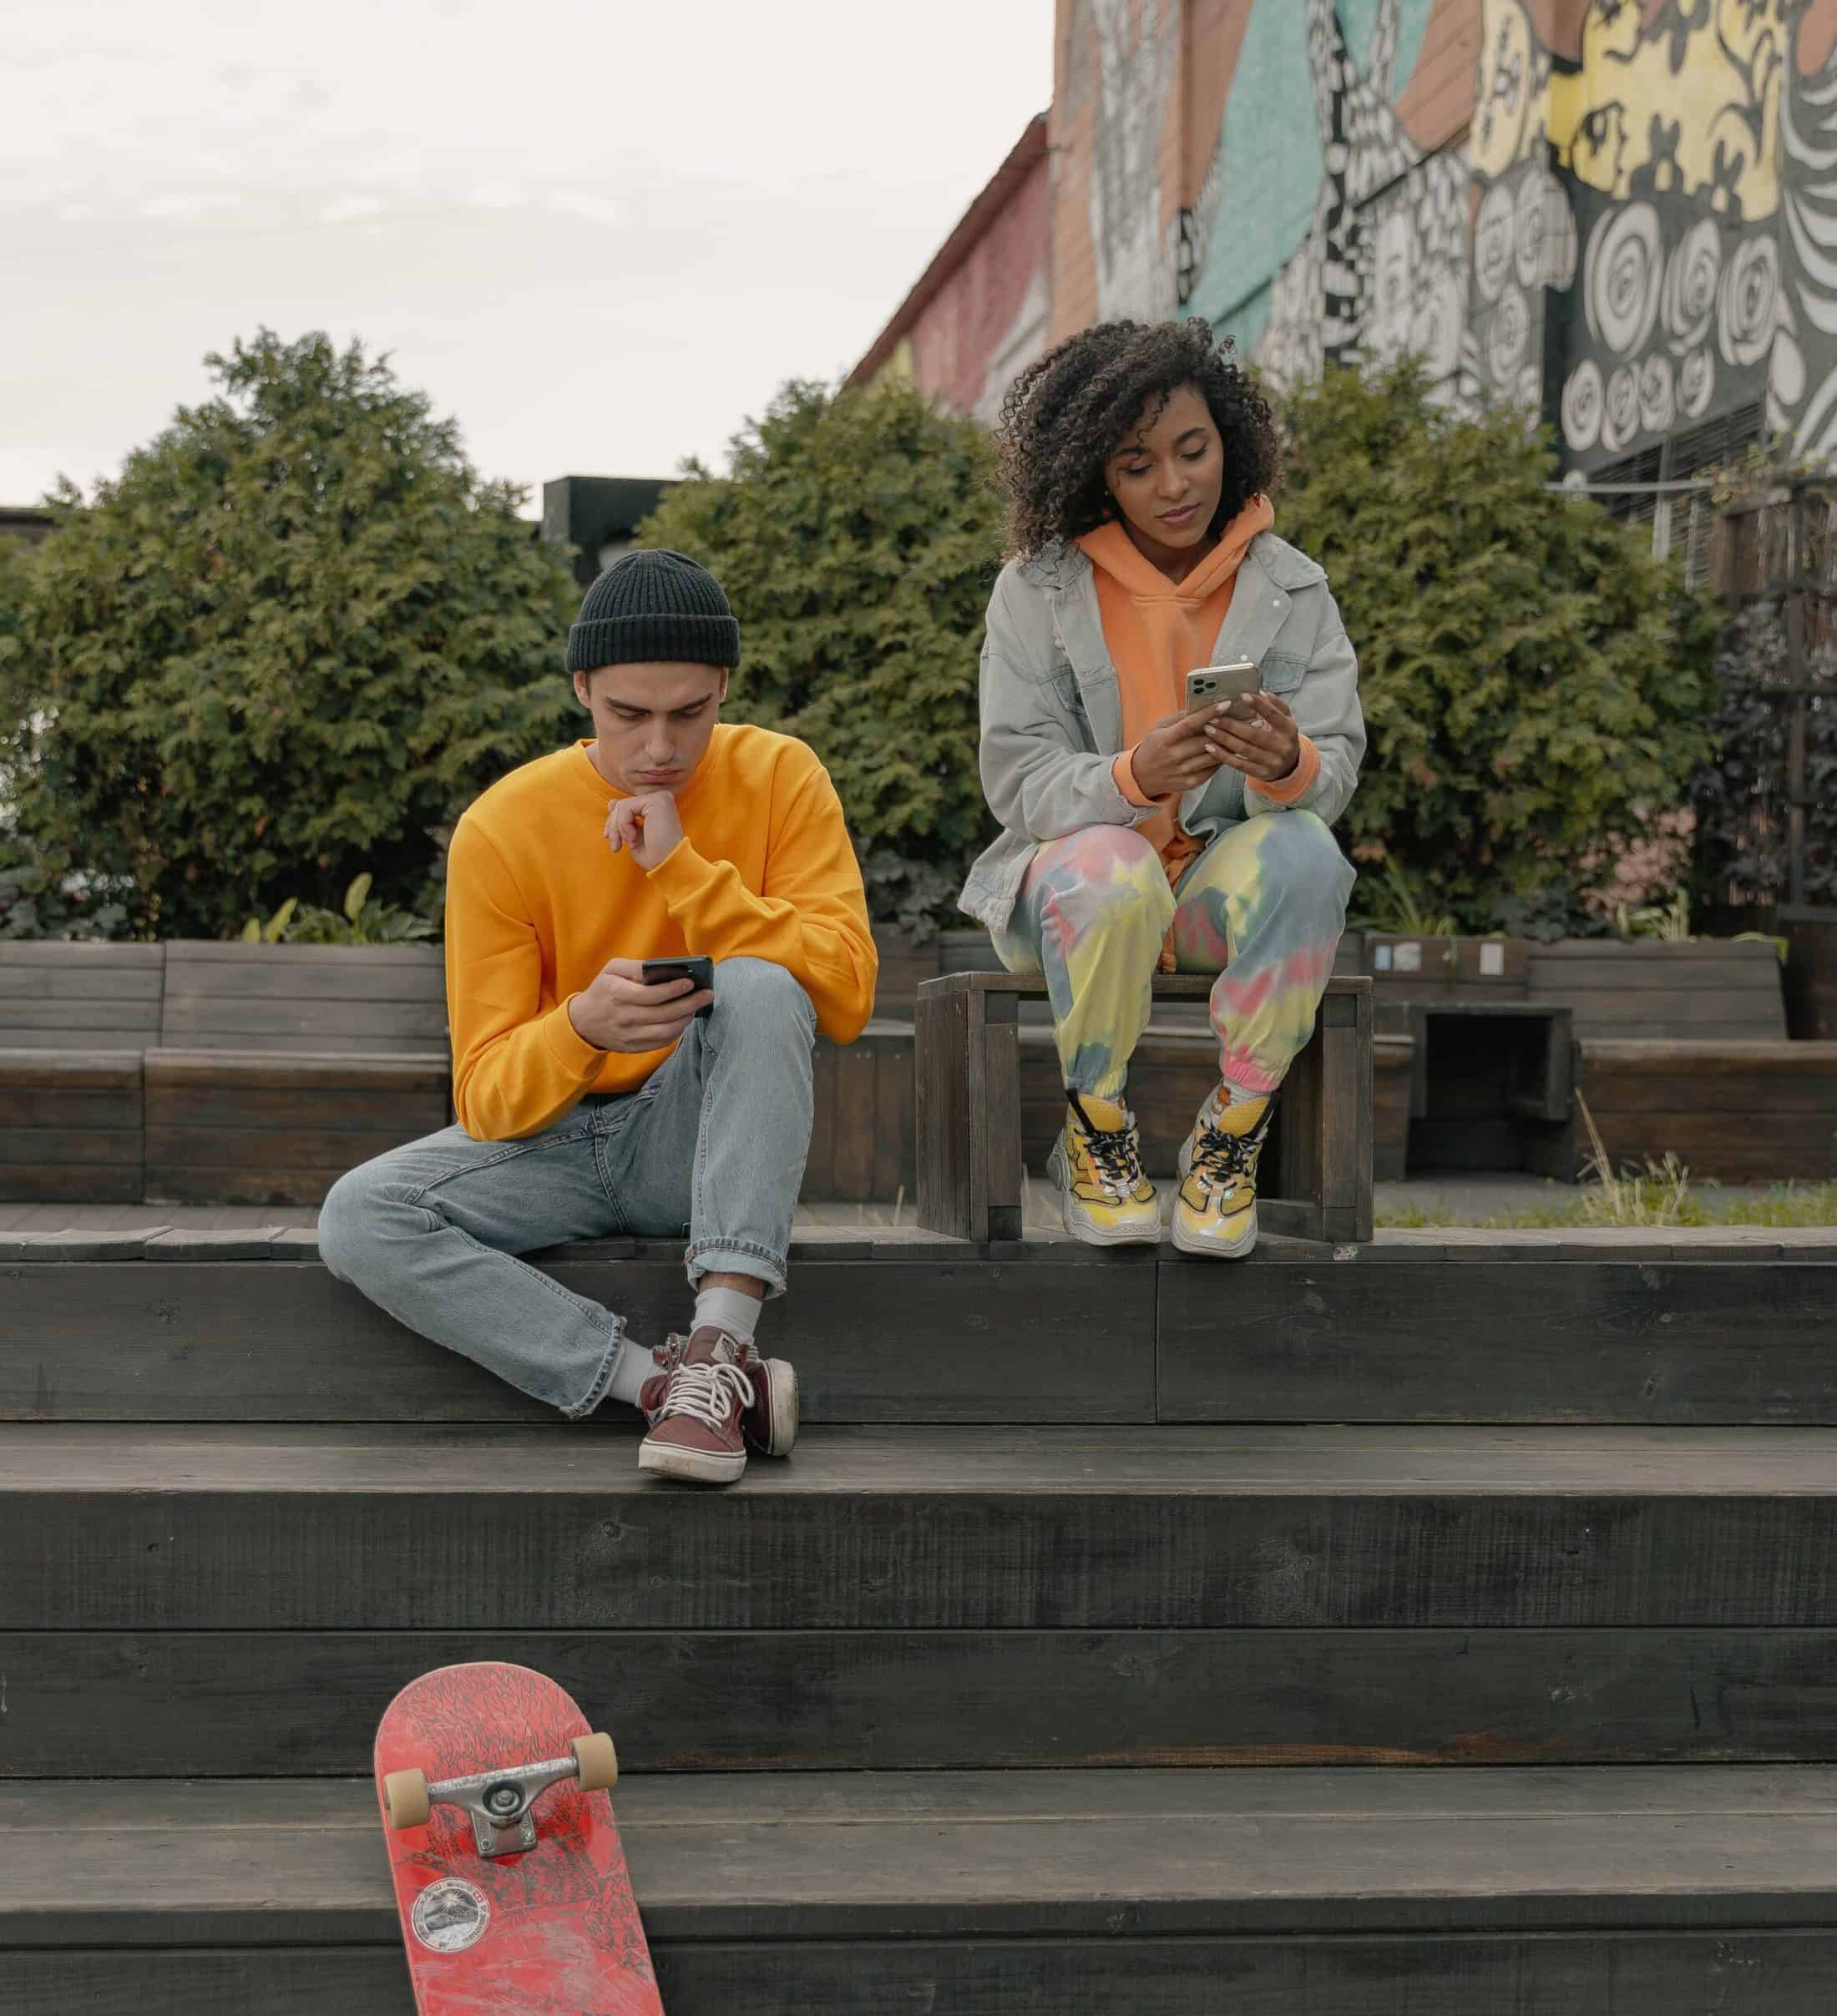 Two people looking at their phones sitting on steps with a skateboard